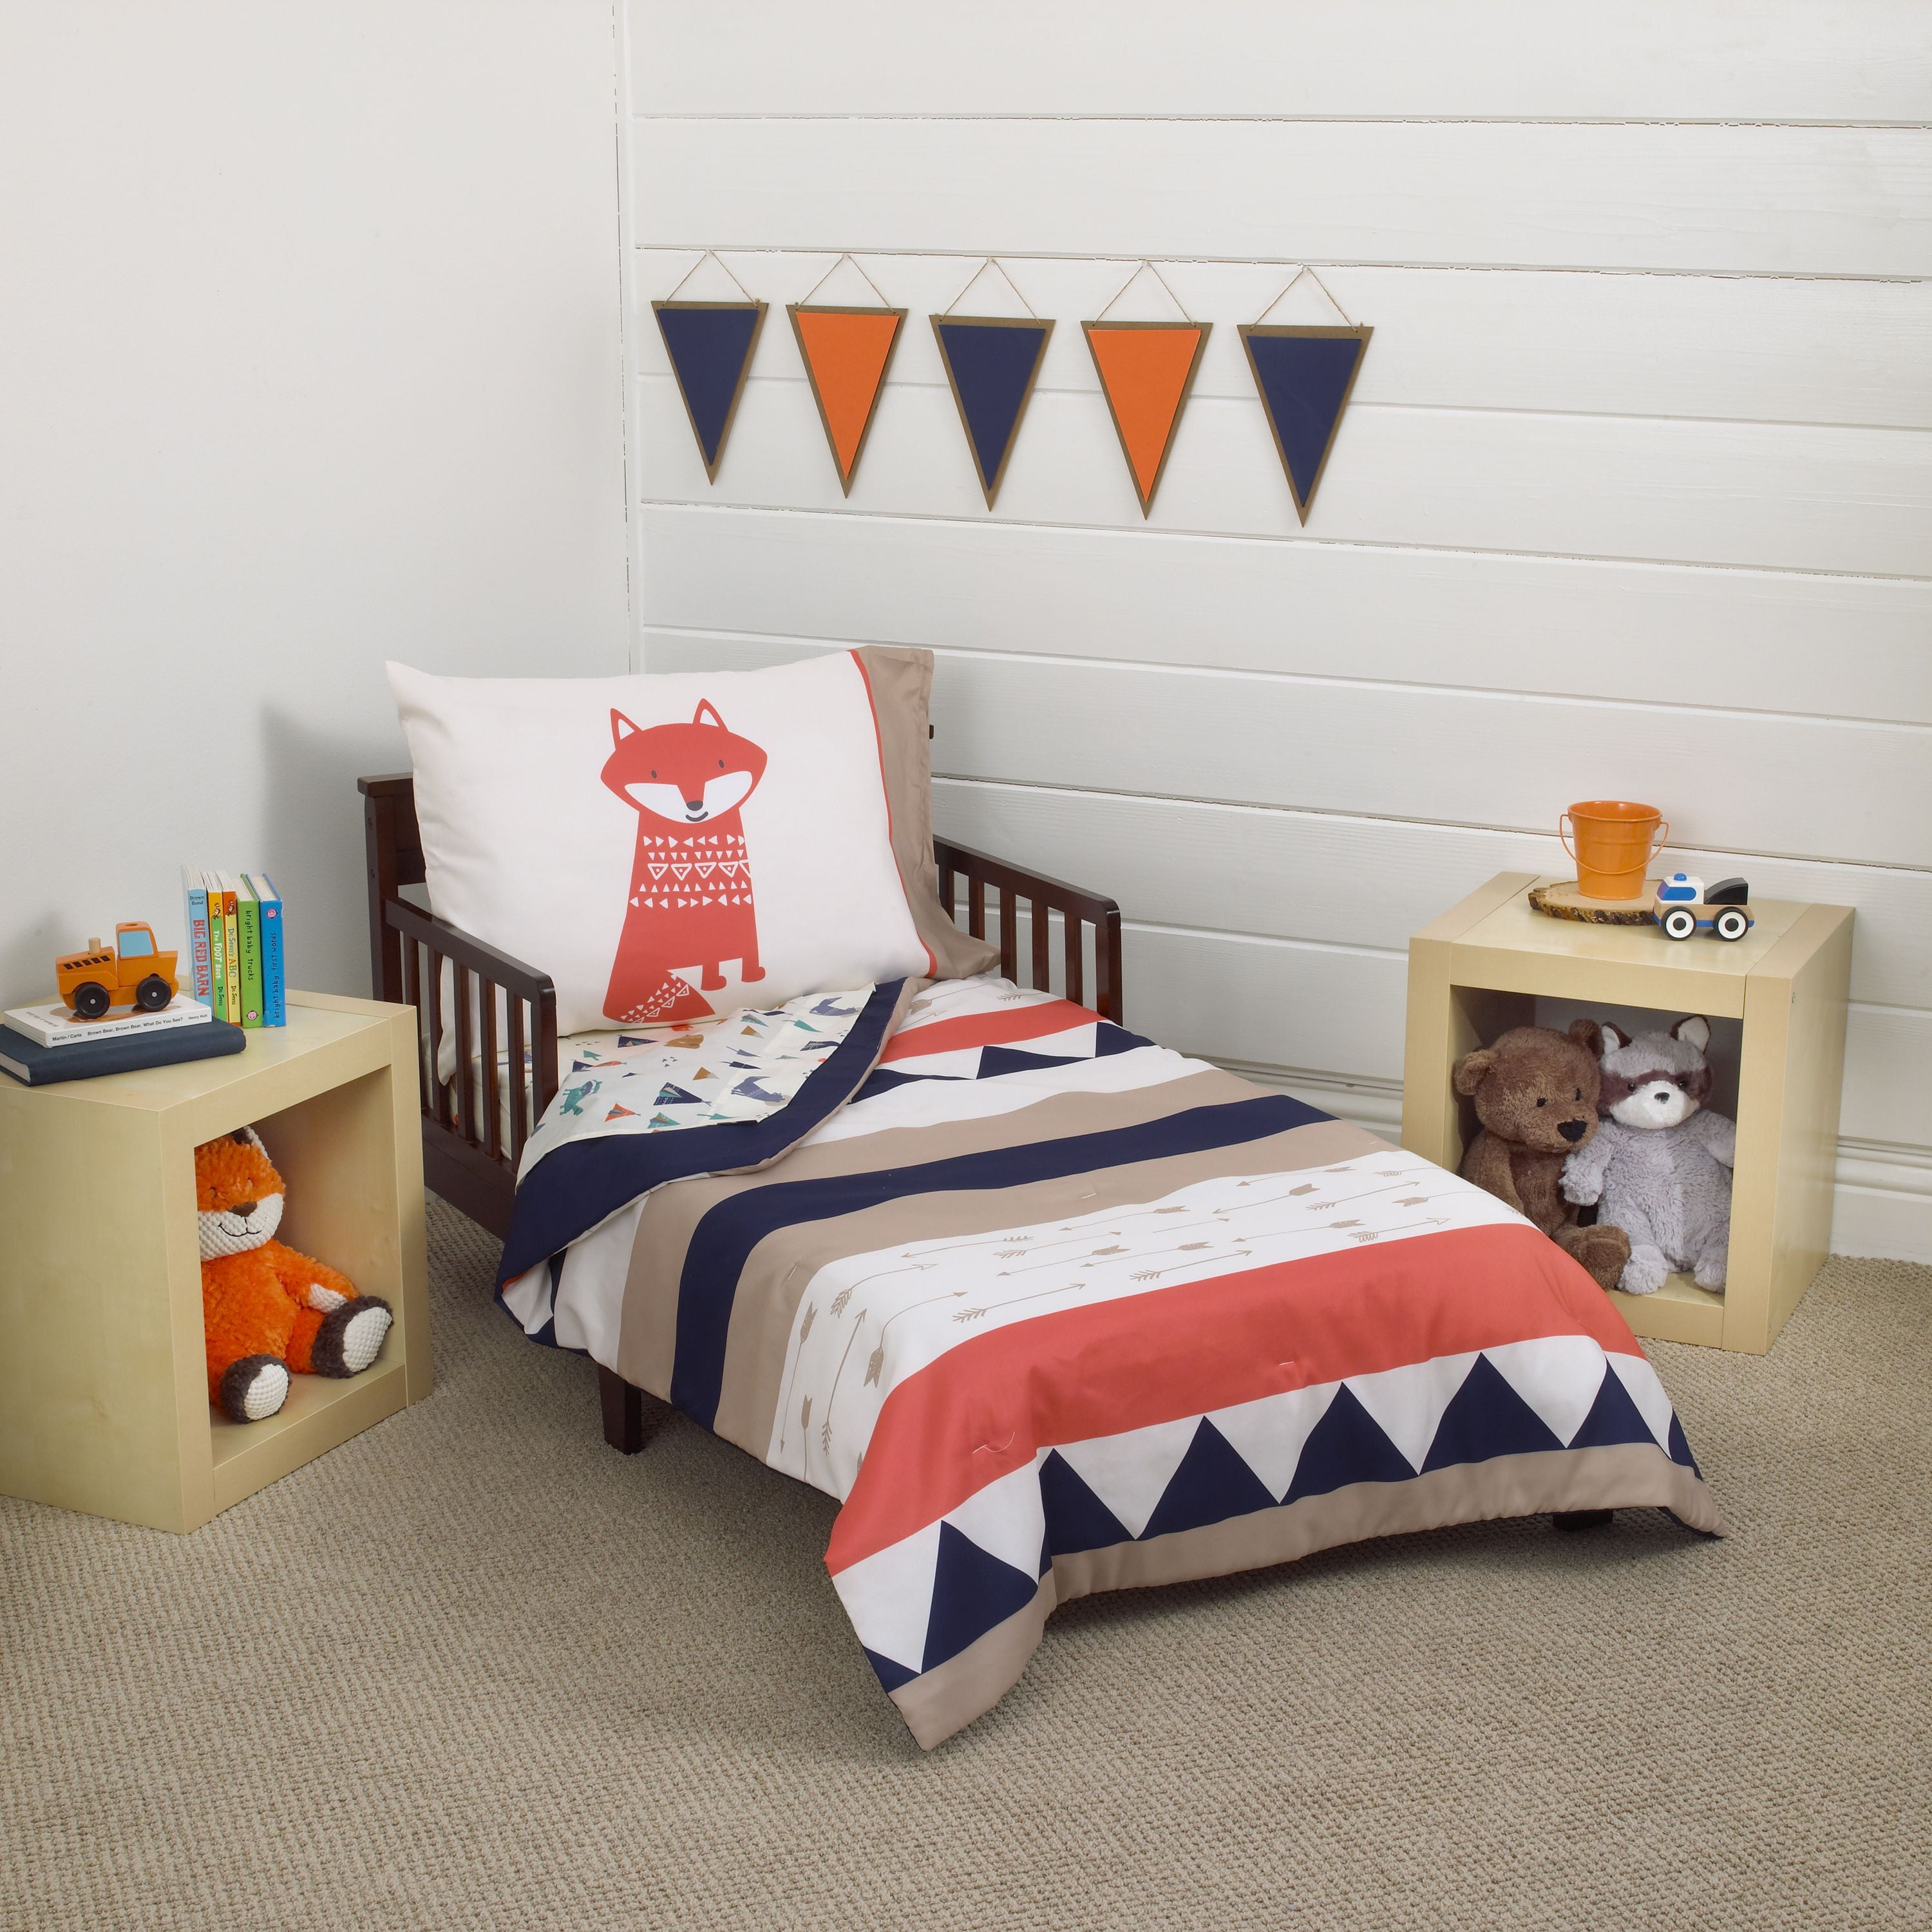 Bedding Set Padded with Doll Motif cot/pram/bed. Navy- Dolls,Embroidered 